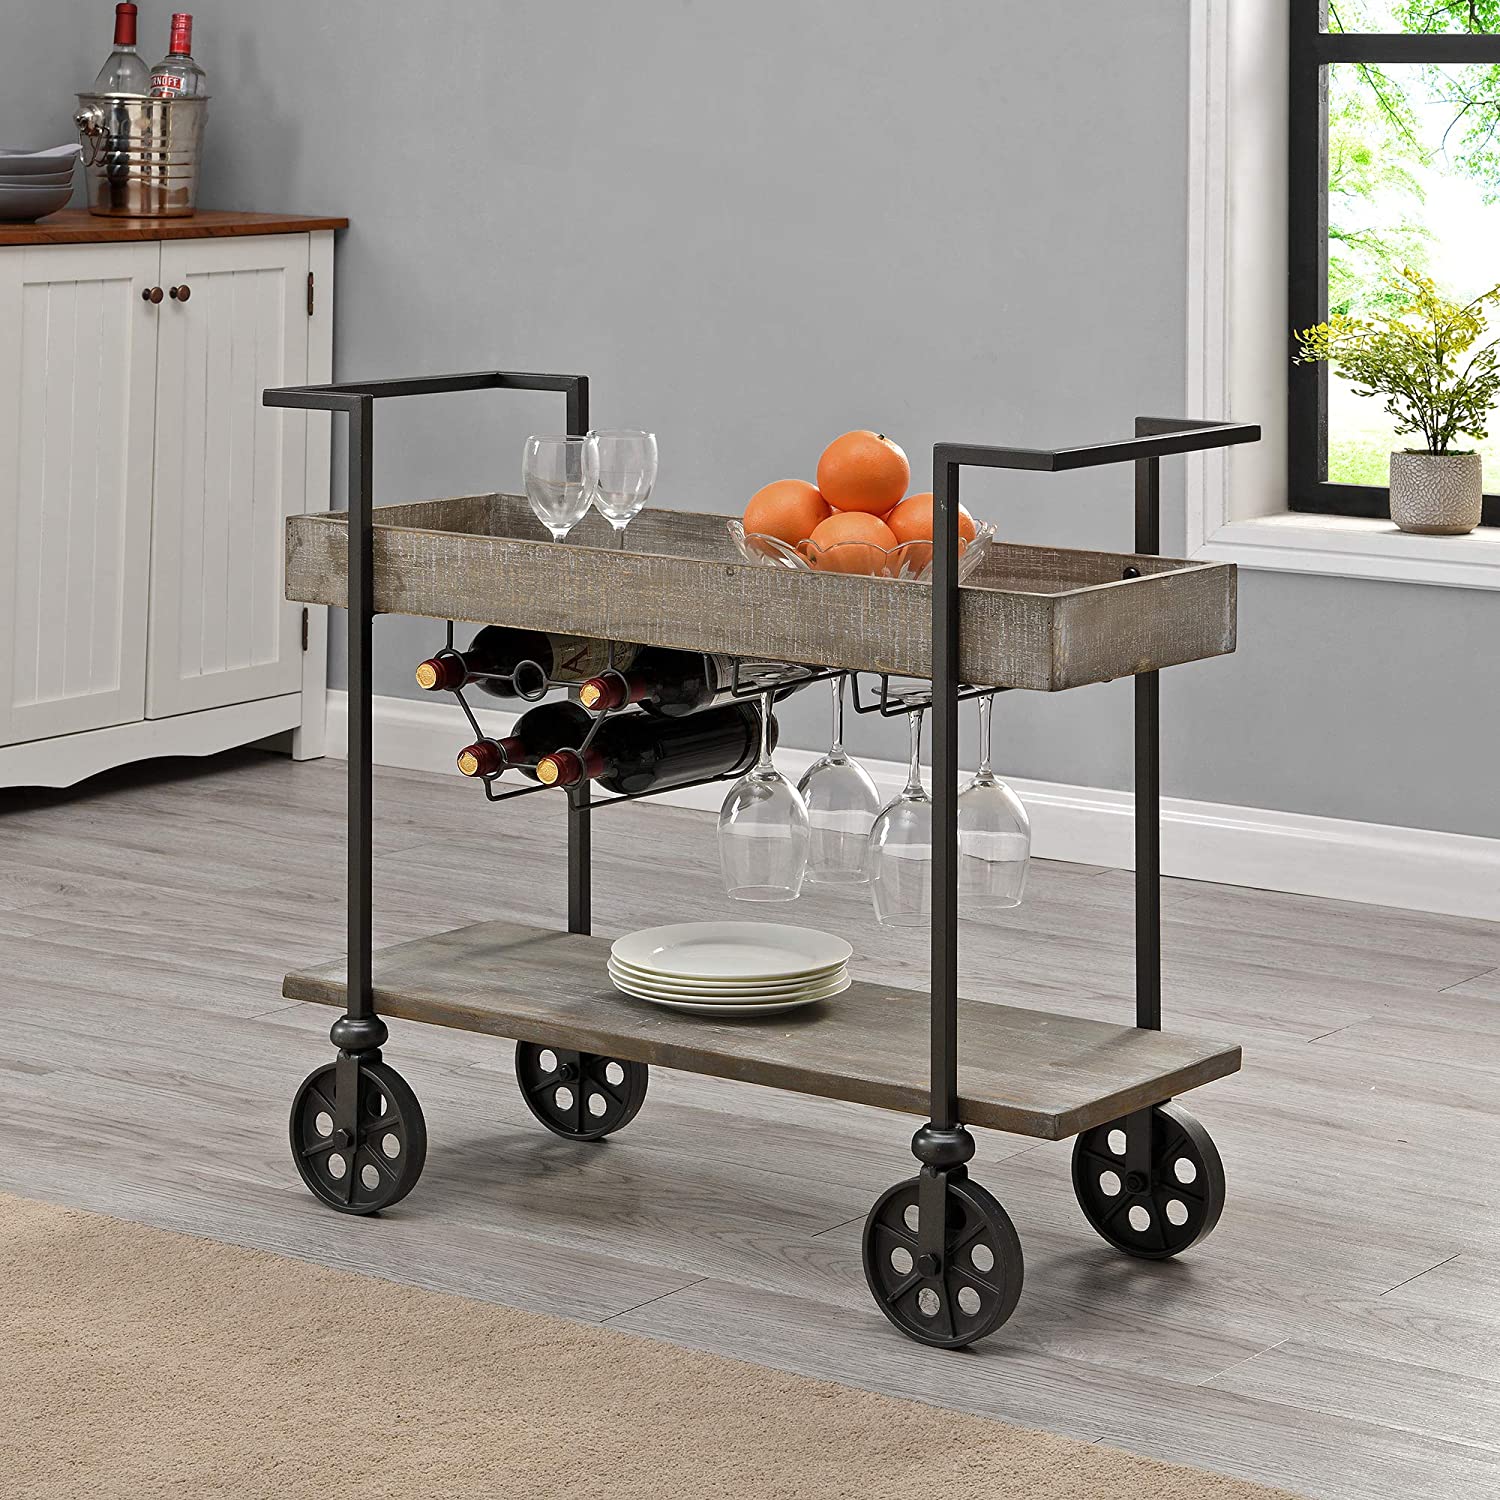 Get Your Bar Trolley Ready For A Party!